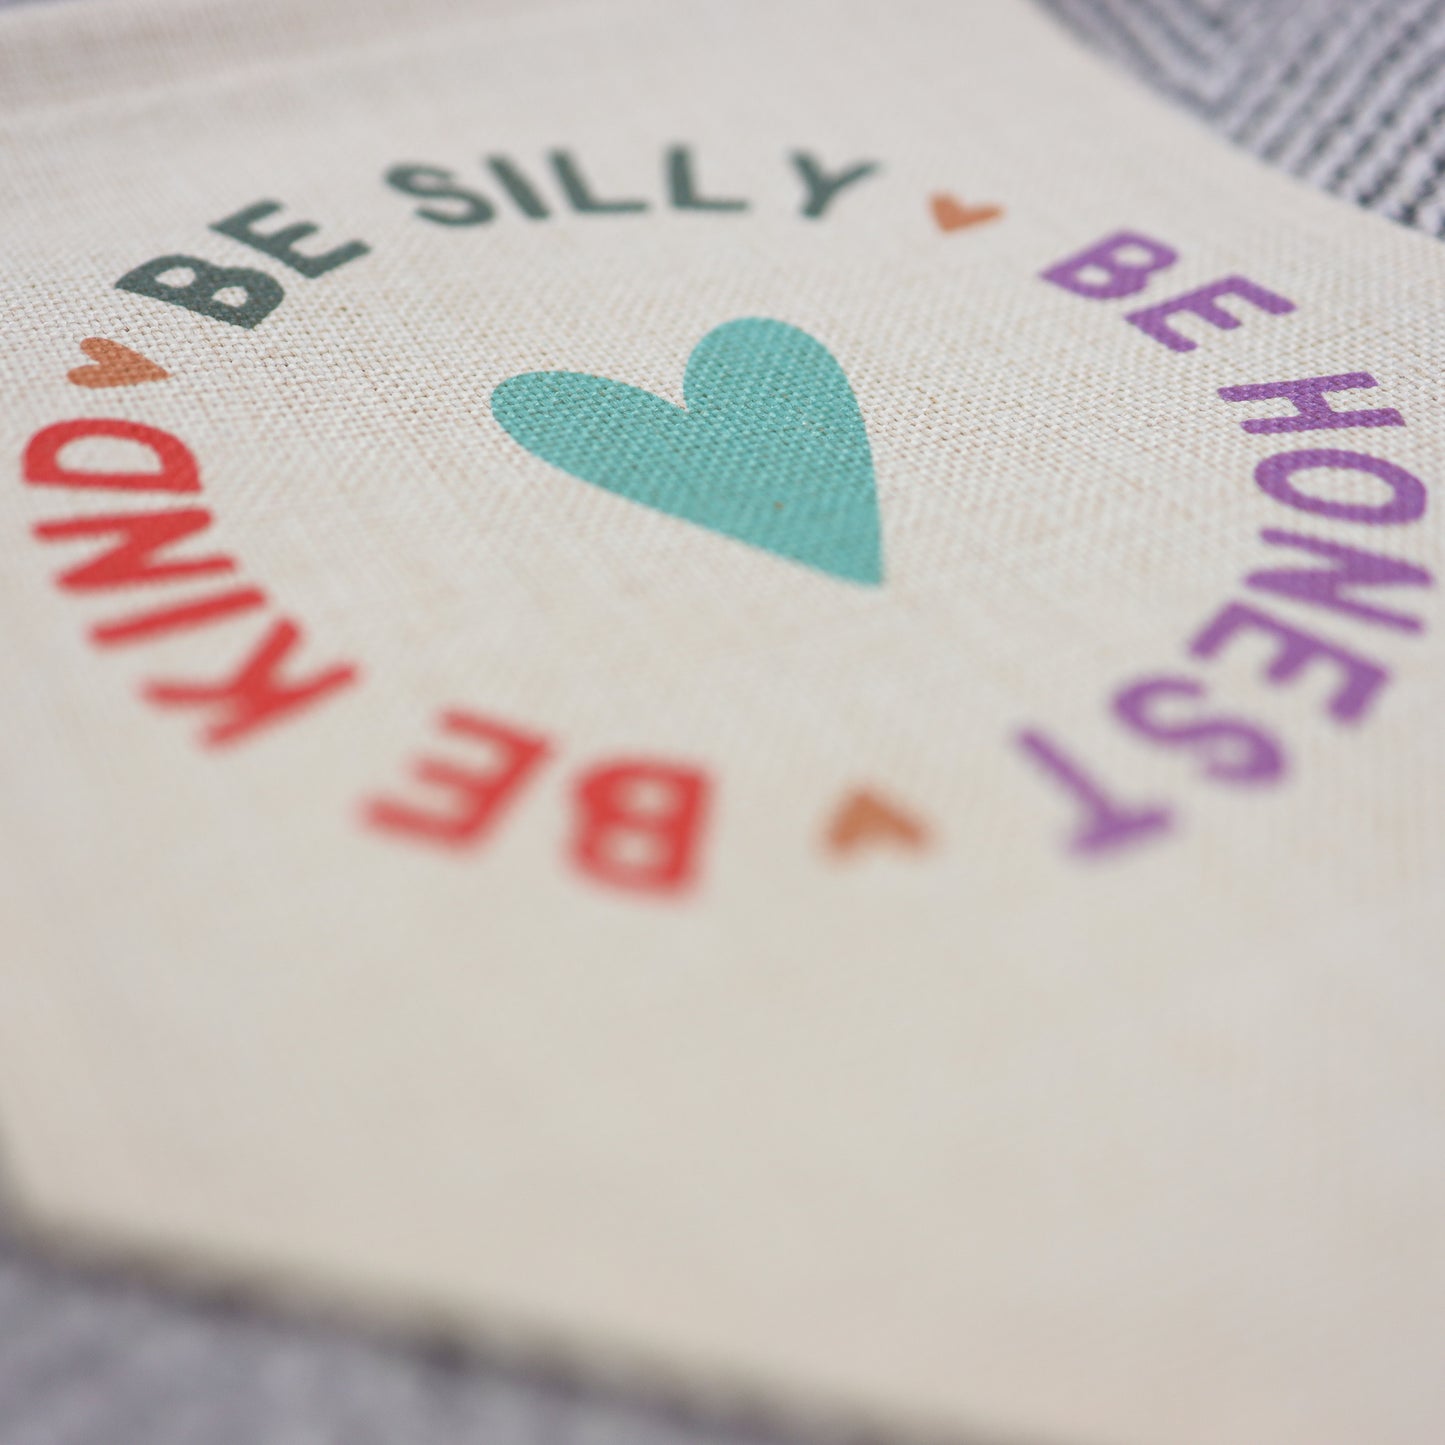 BE SILLY, BE HONEST, BE KIND Linen Pennant